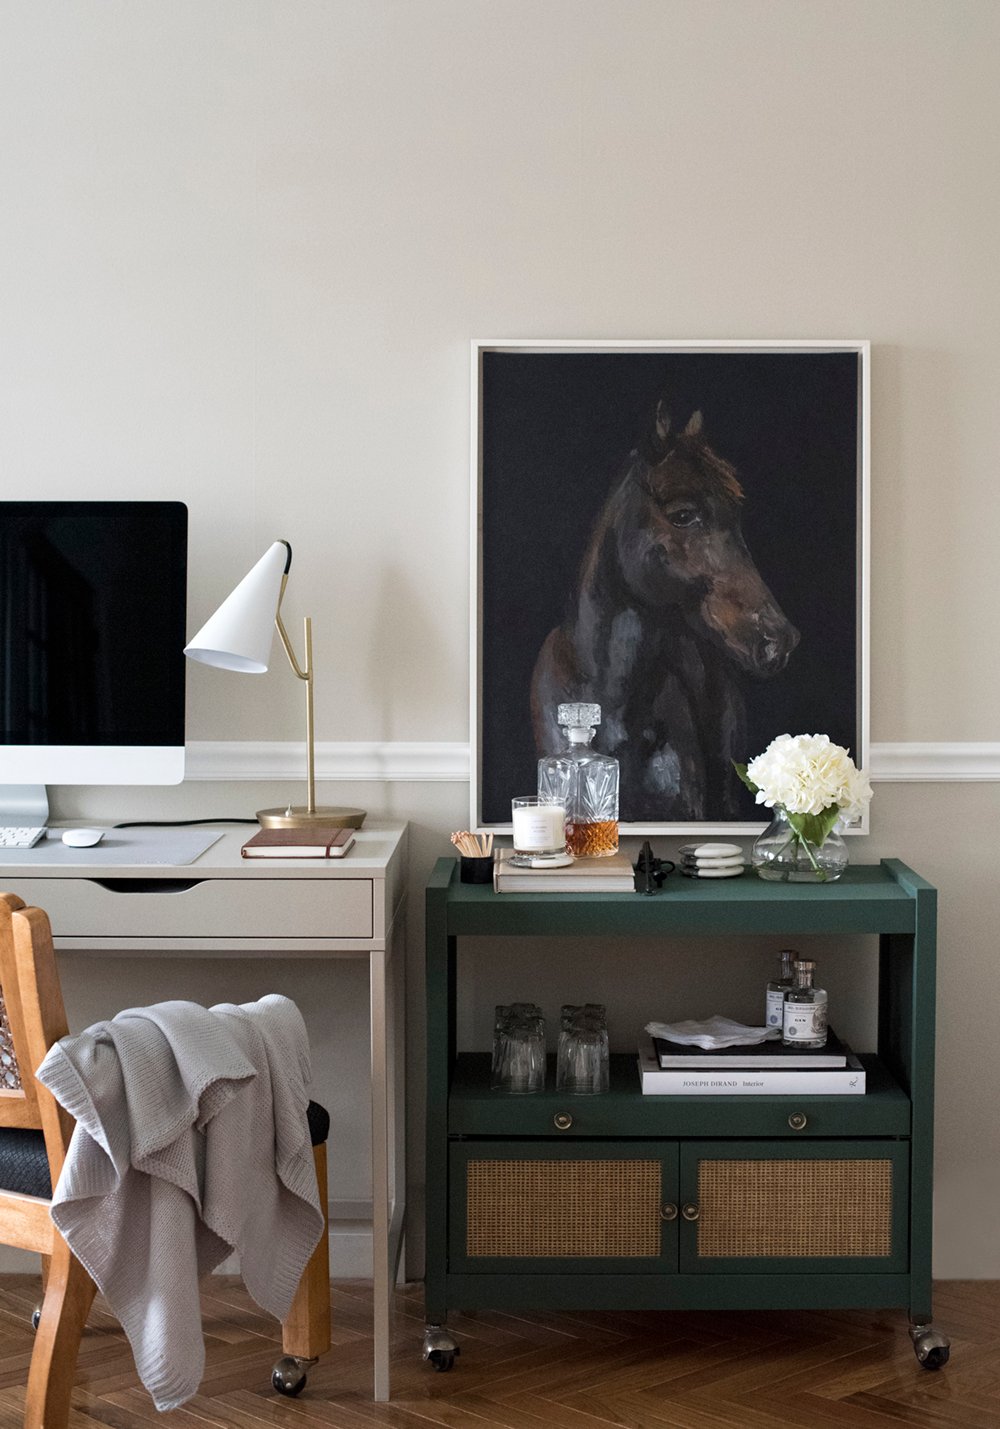 Kentucky Derby & Equestrian Inspired Home Finds - roomfortuesday.com